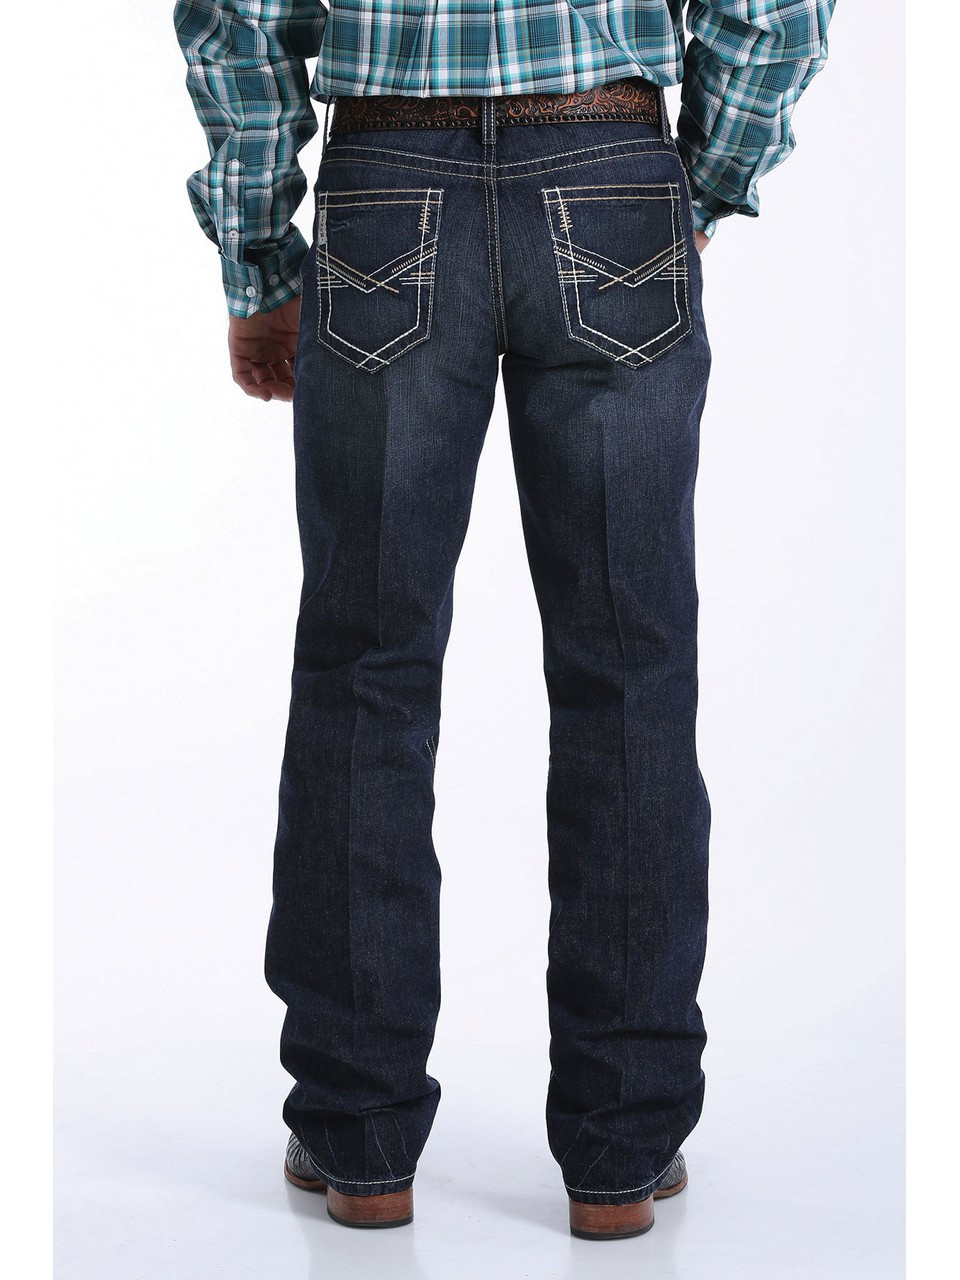 cinch jeans grant